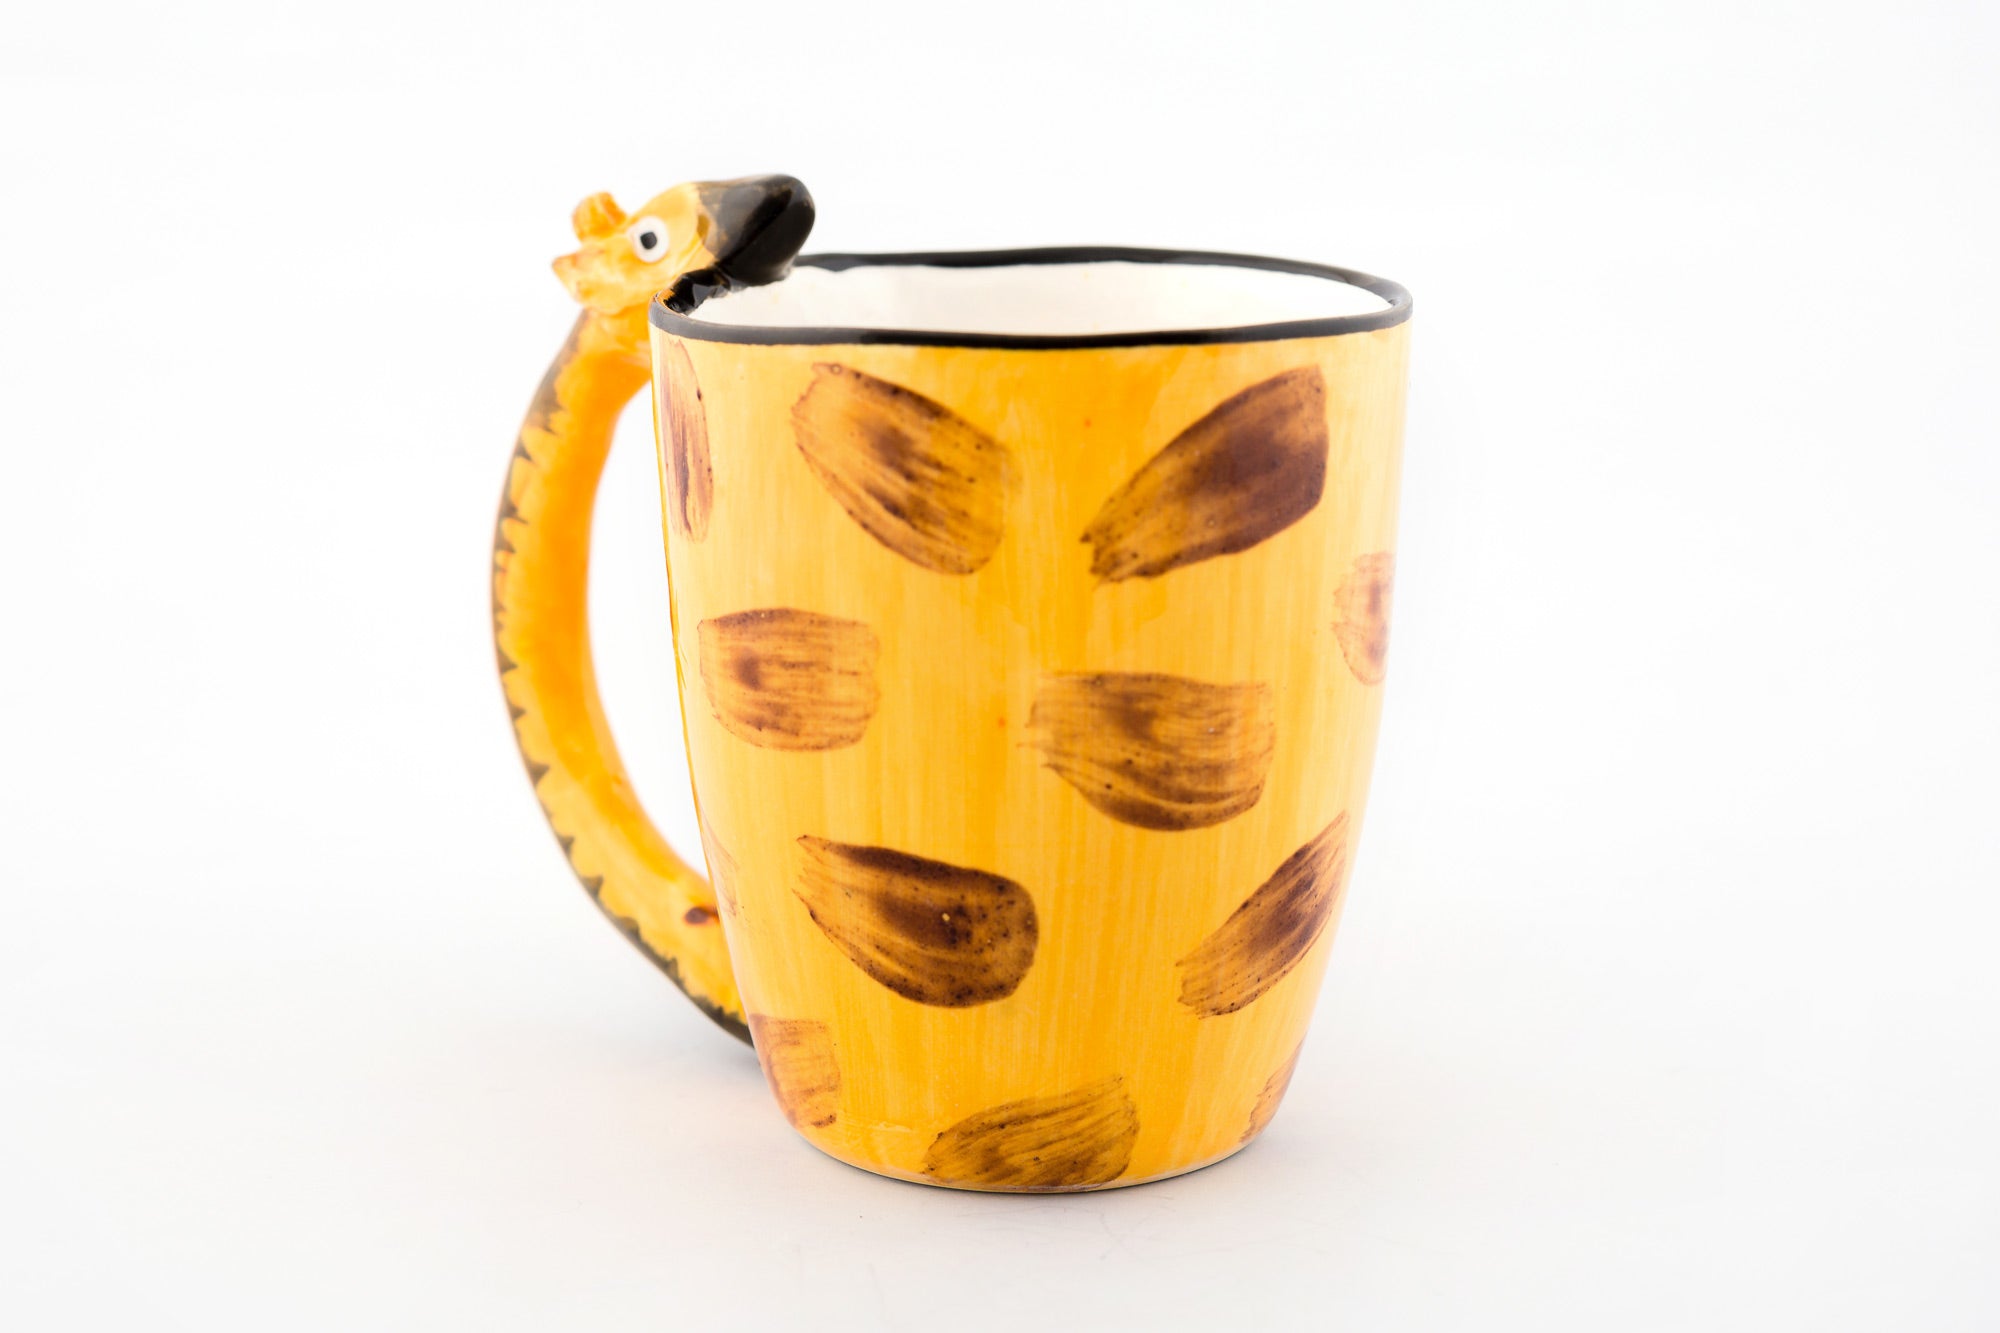 Reverse side of the ceramic coffee mug with a Giraffe neck for the handle and his head resting on the lip of the mug. Painted in giraffe skin colors of yellow & brown with white inside the mug.